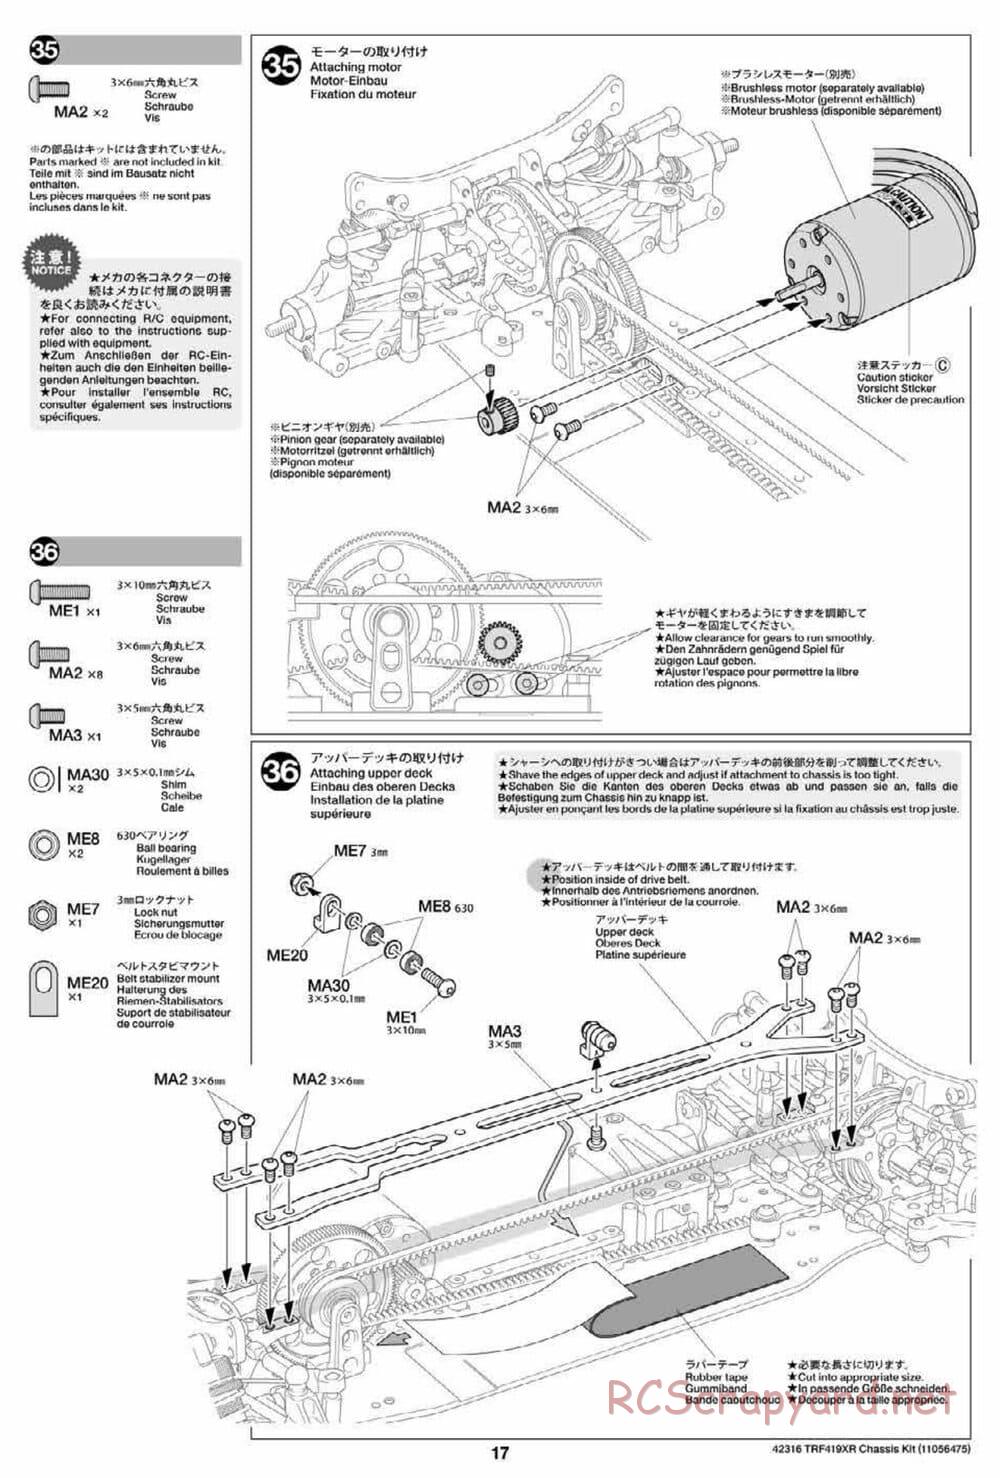 Tamiya - TRF419XR Chassis - Manual - Page 17